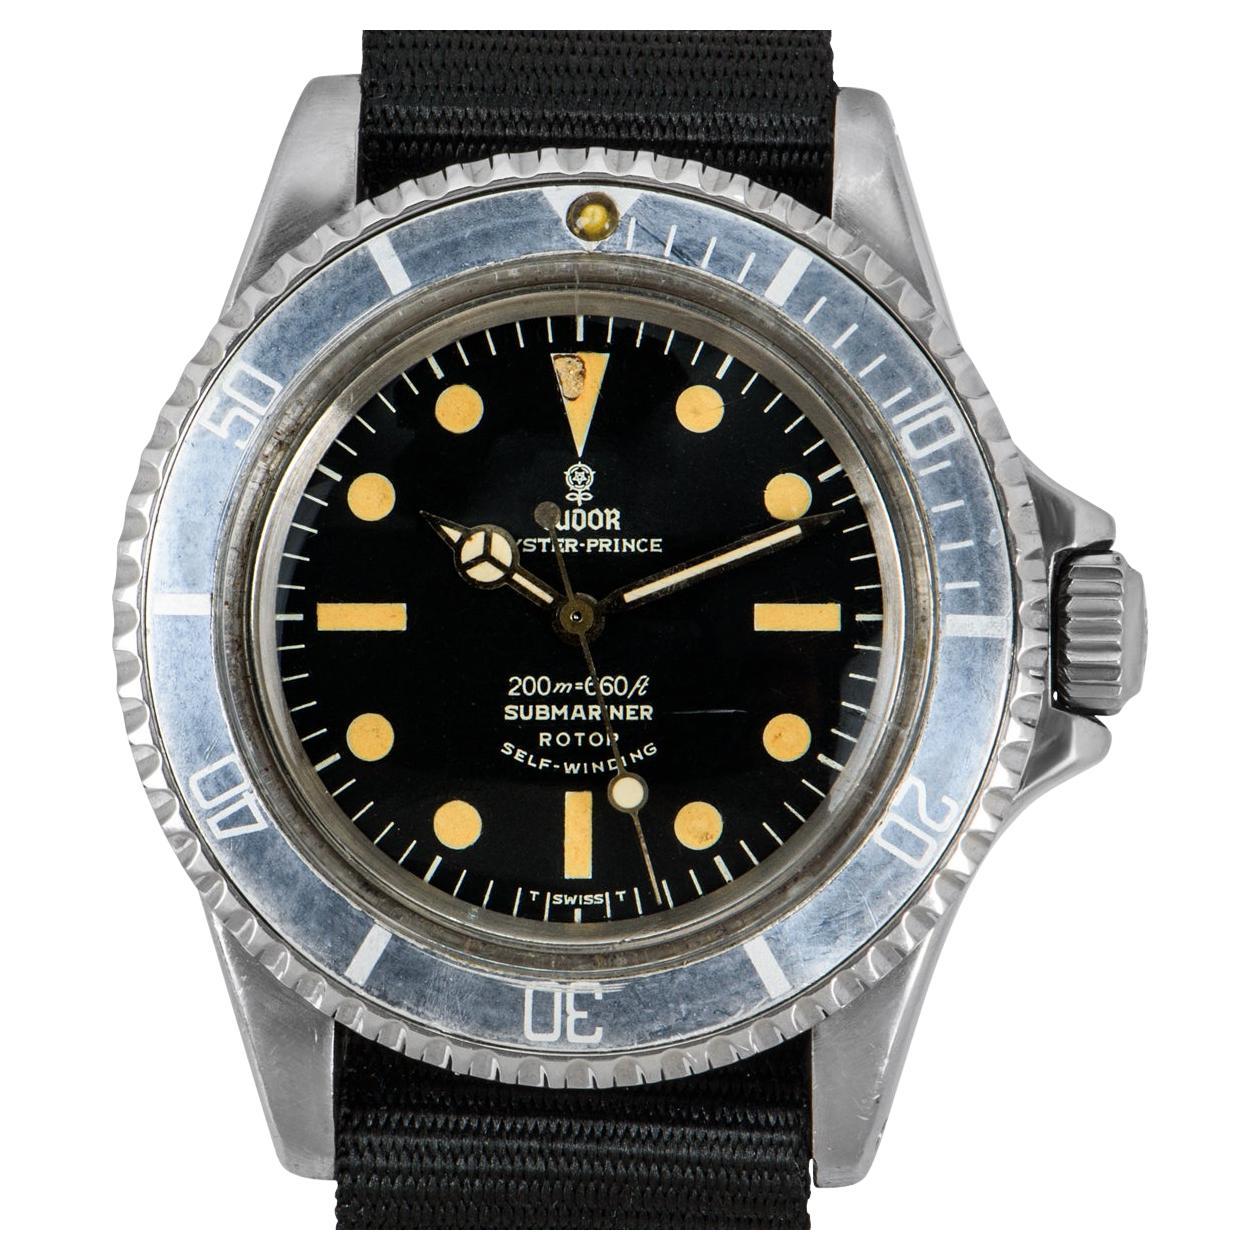 A vintage stainless steel 40mm Submariner by Tudor. Featuring a matte black dial with a stainless steel bi-directional rotating bezel with a black bezel insert. Equipped with a black nato style strap and generic pin buckle. The watch is further